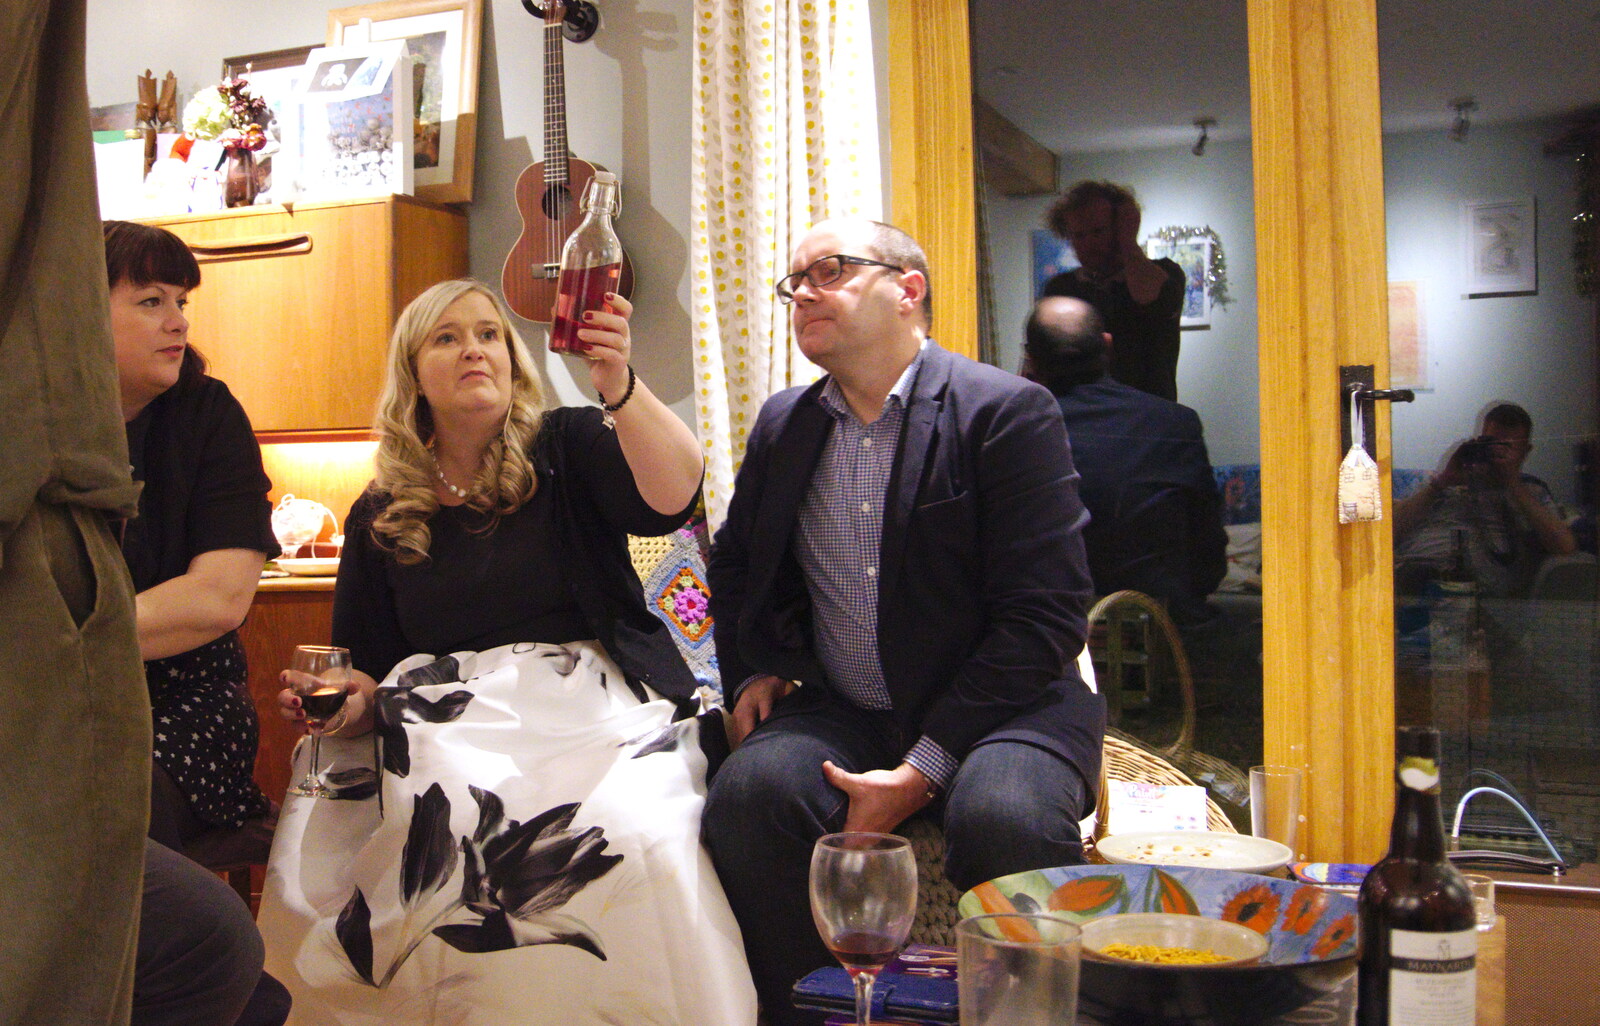 Helen warily inspects Wavy's bottle of booze from A New Year's Eve Party, Brome, Suffolk - 31st December 2019